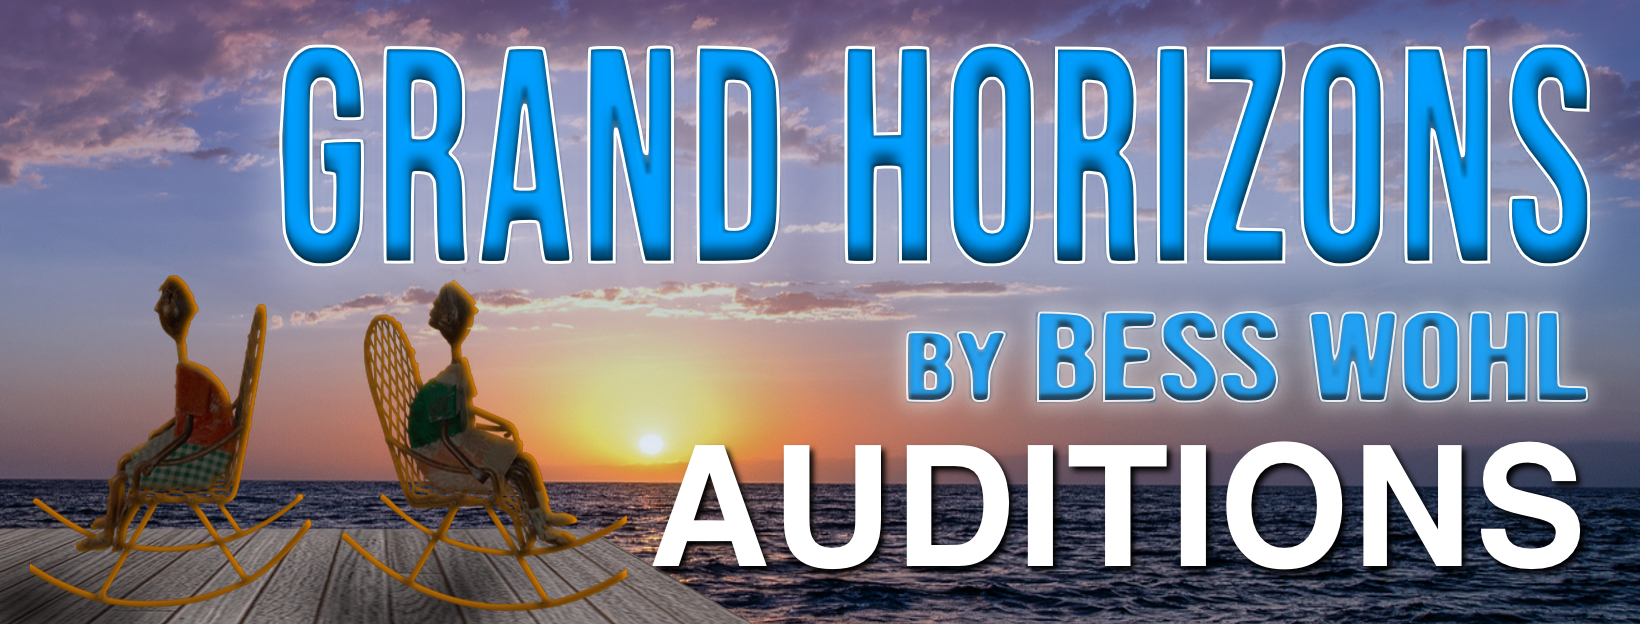 Grand Horizons Auditions